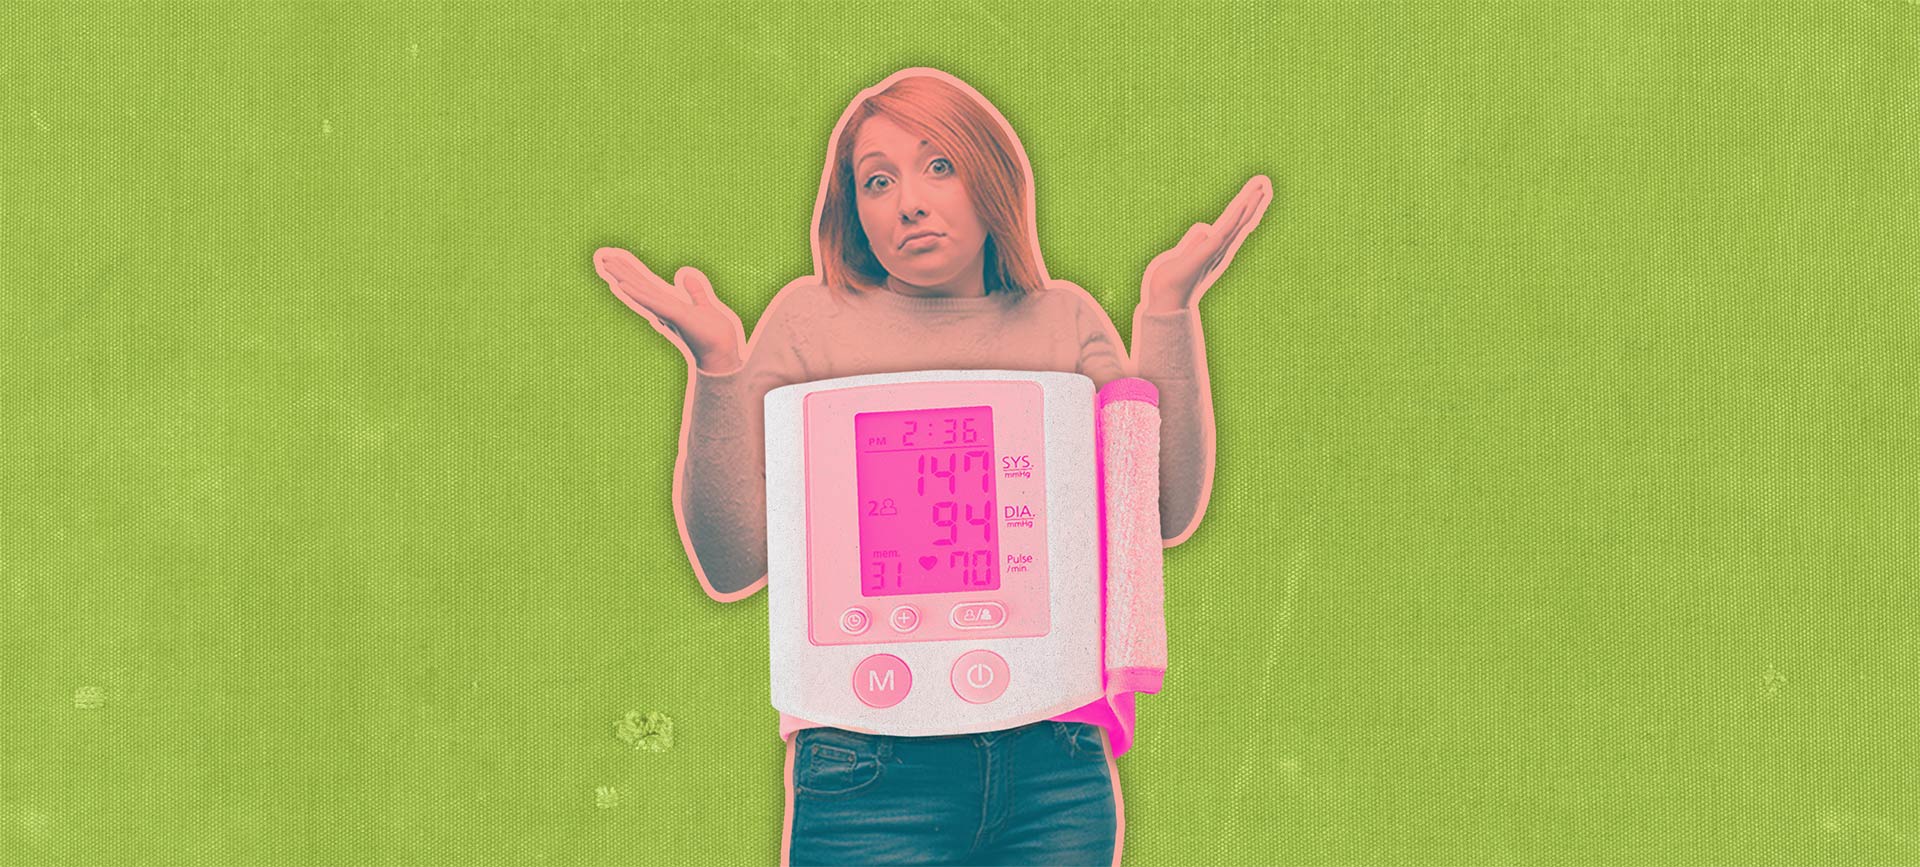 woman holds arms up in confusion behind a heart monitor on a green background